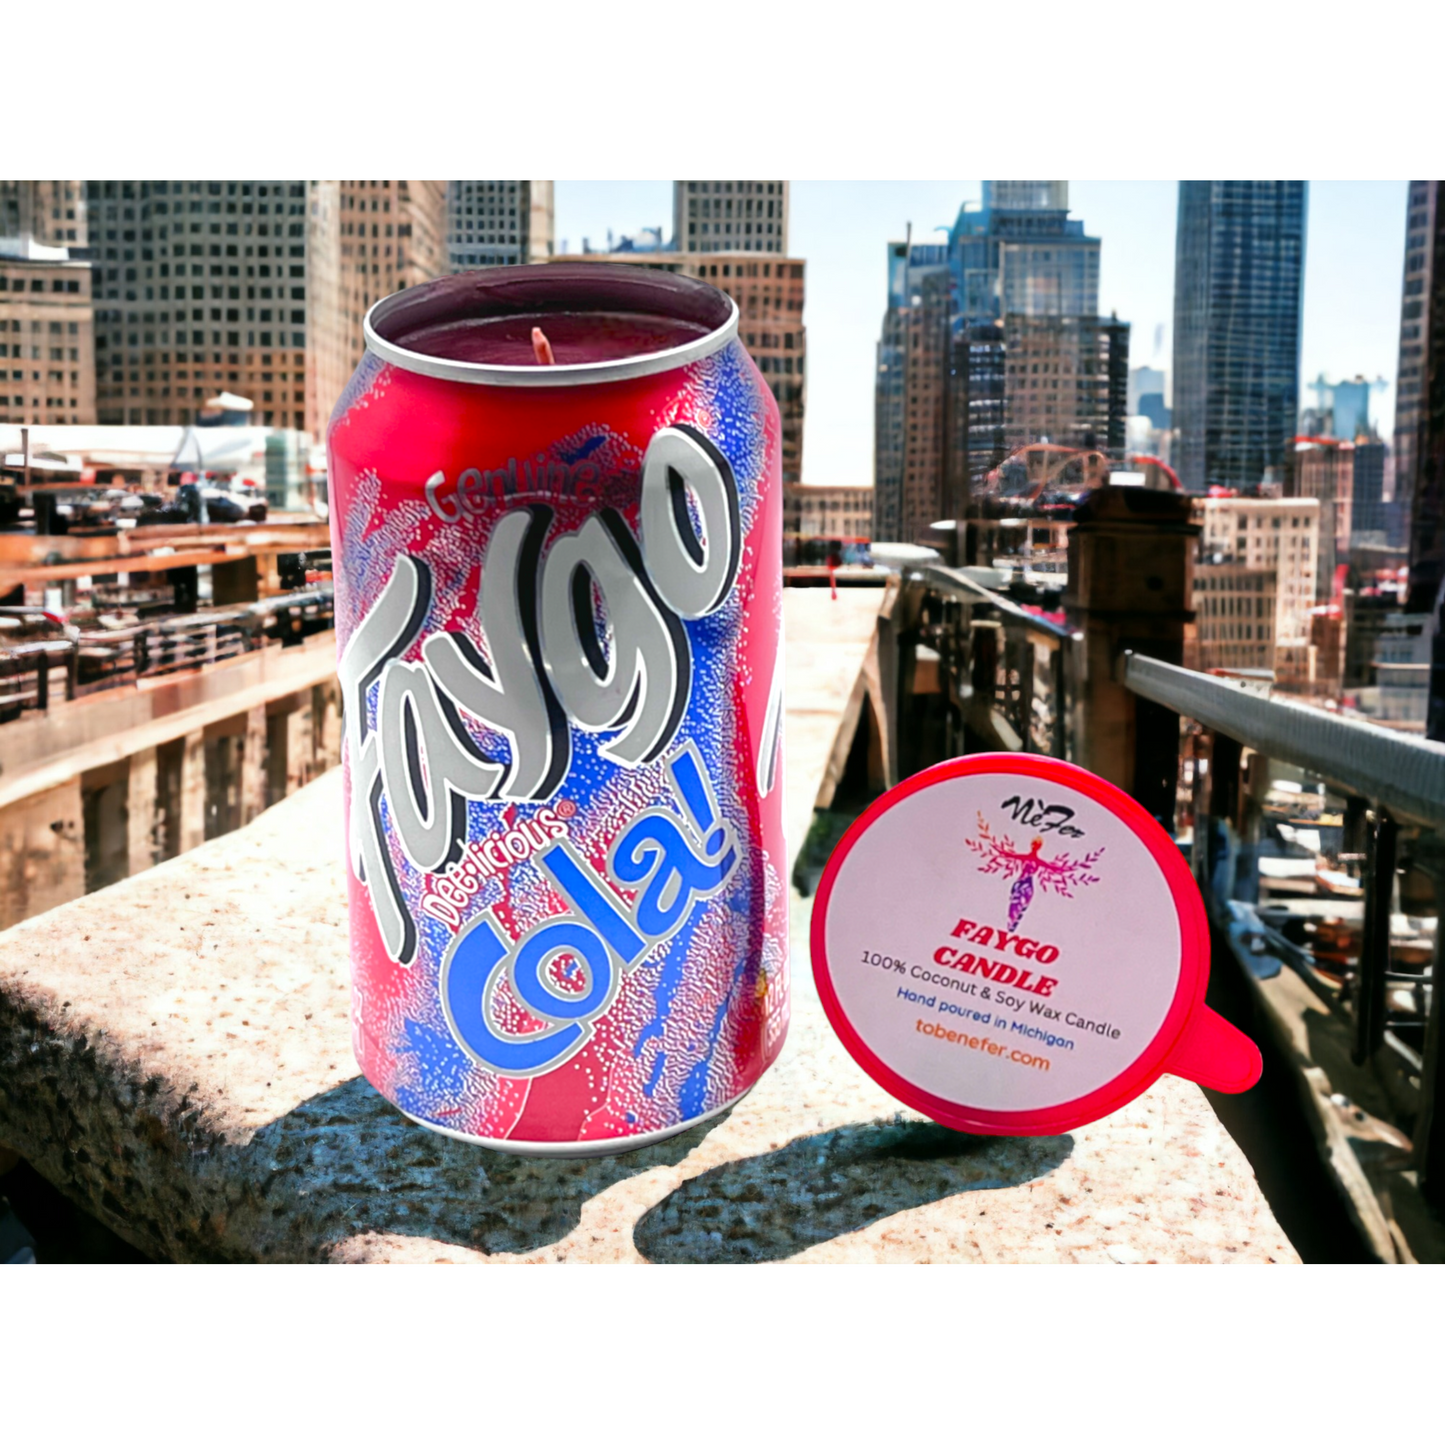 Faygo Cola Candle | 12 oz Can